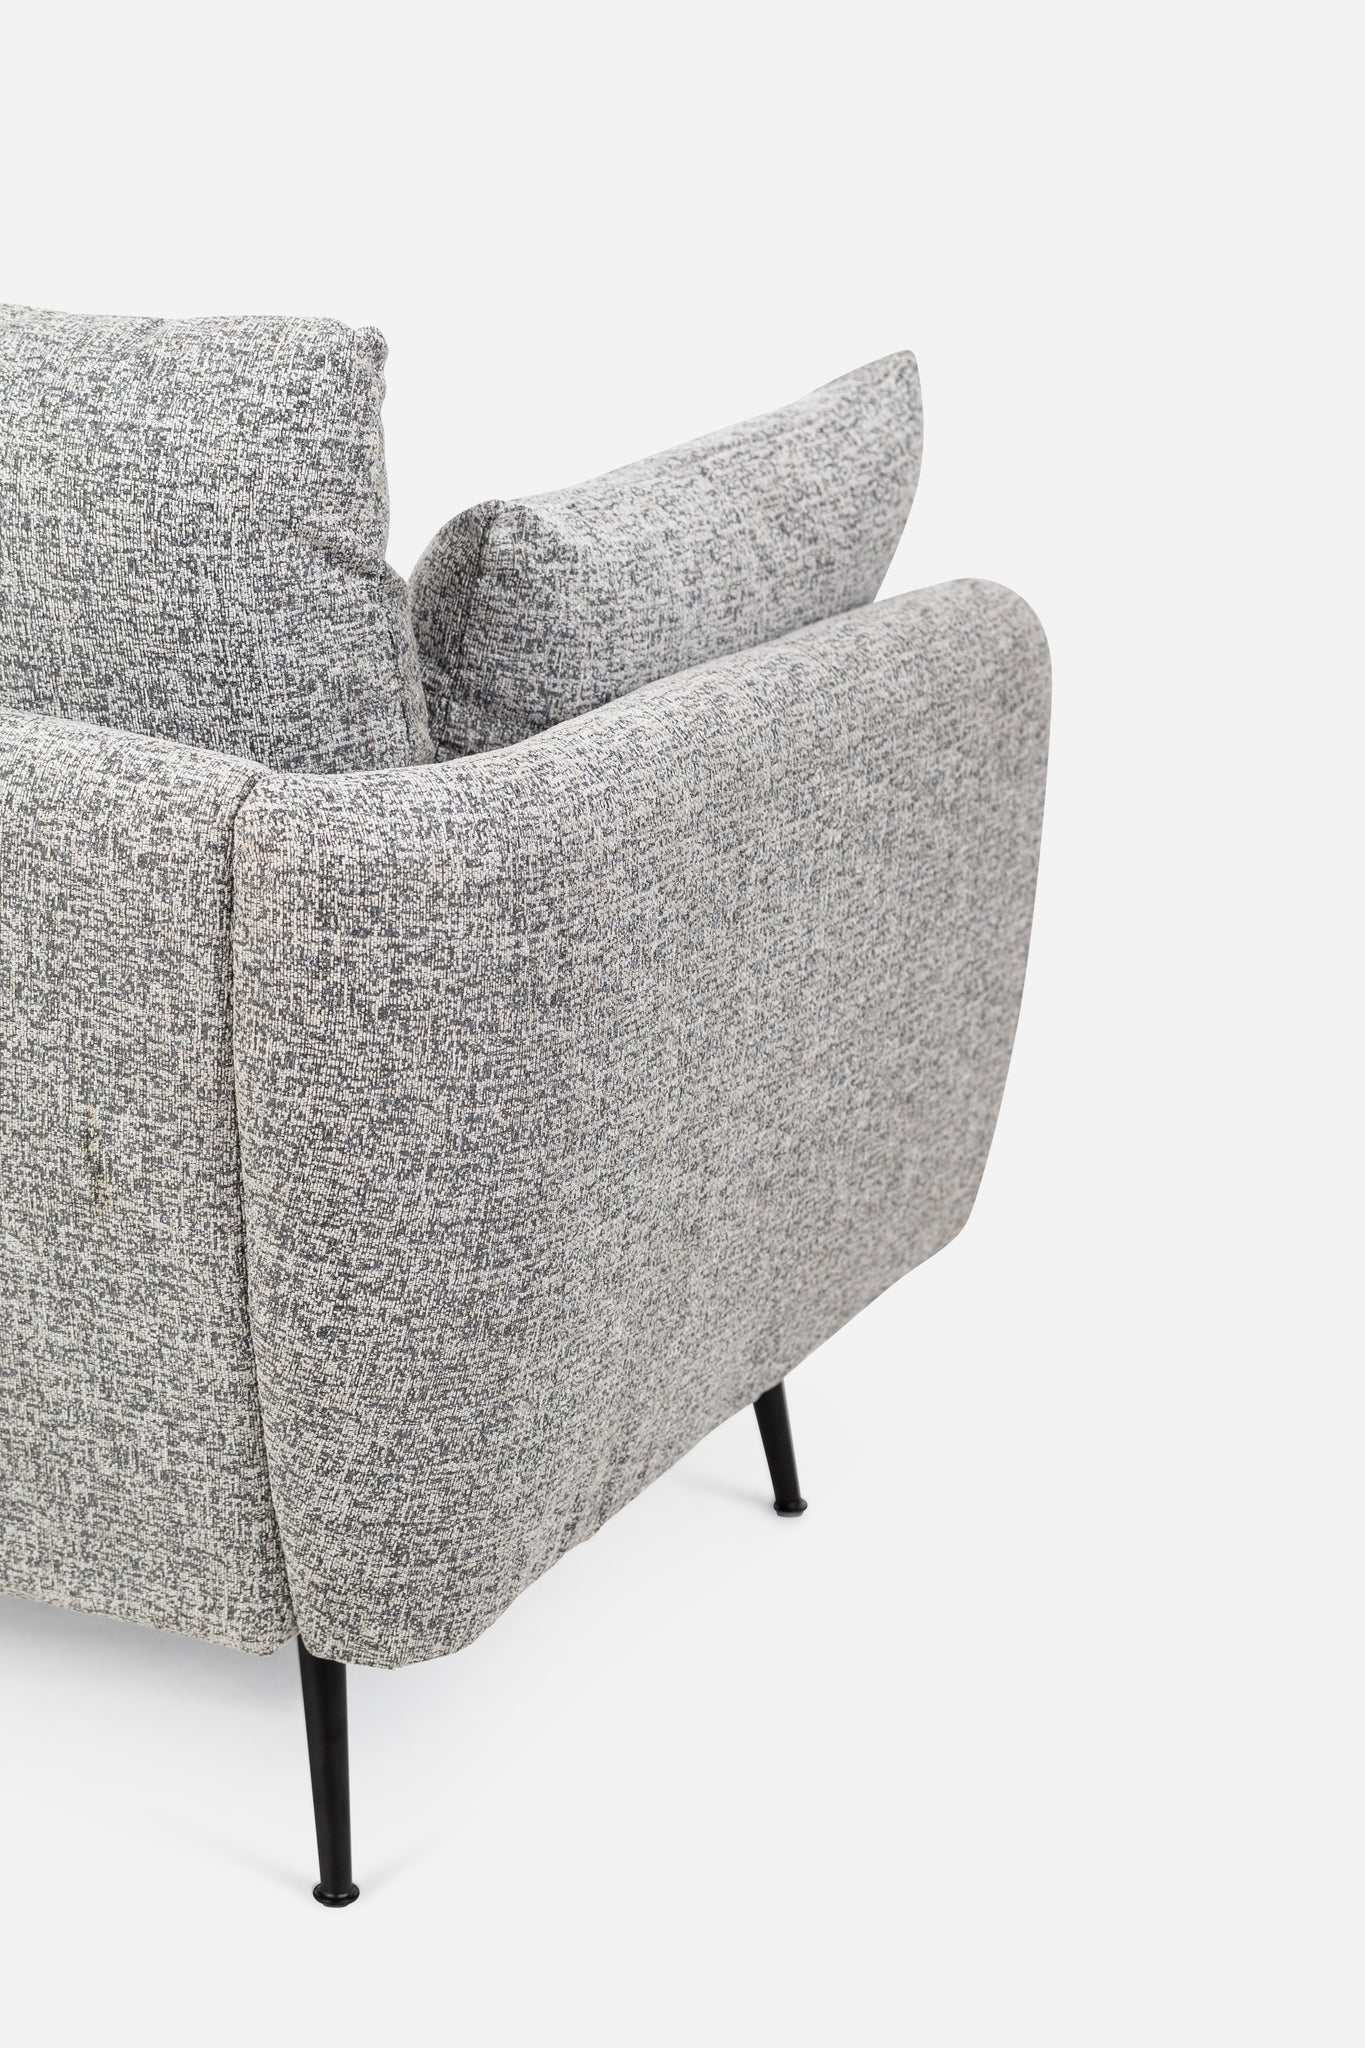 park armchair shown in grey fabric with black legs